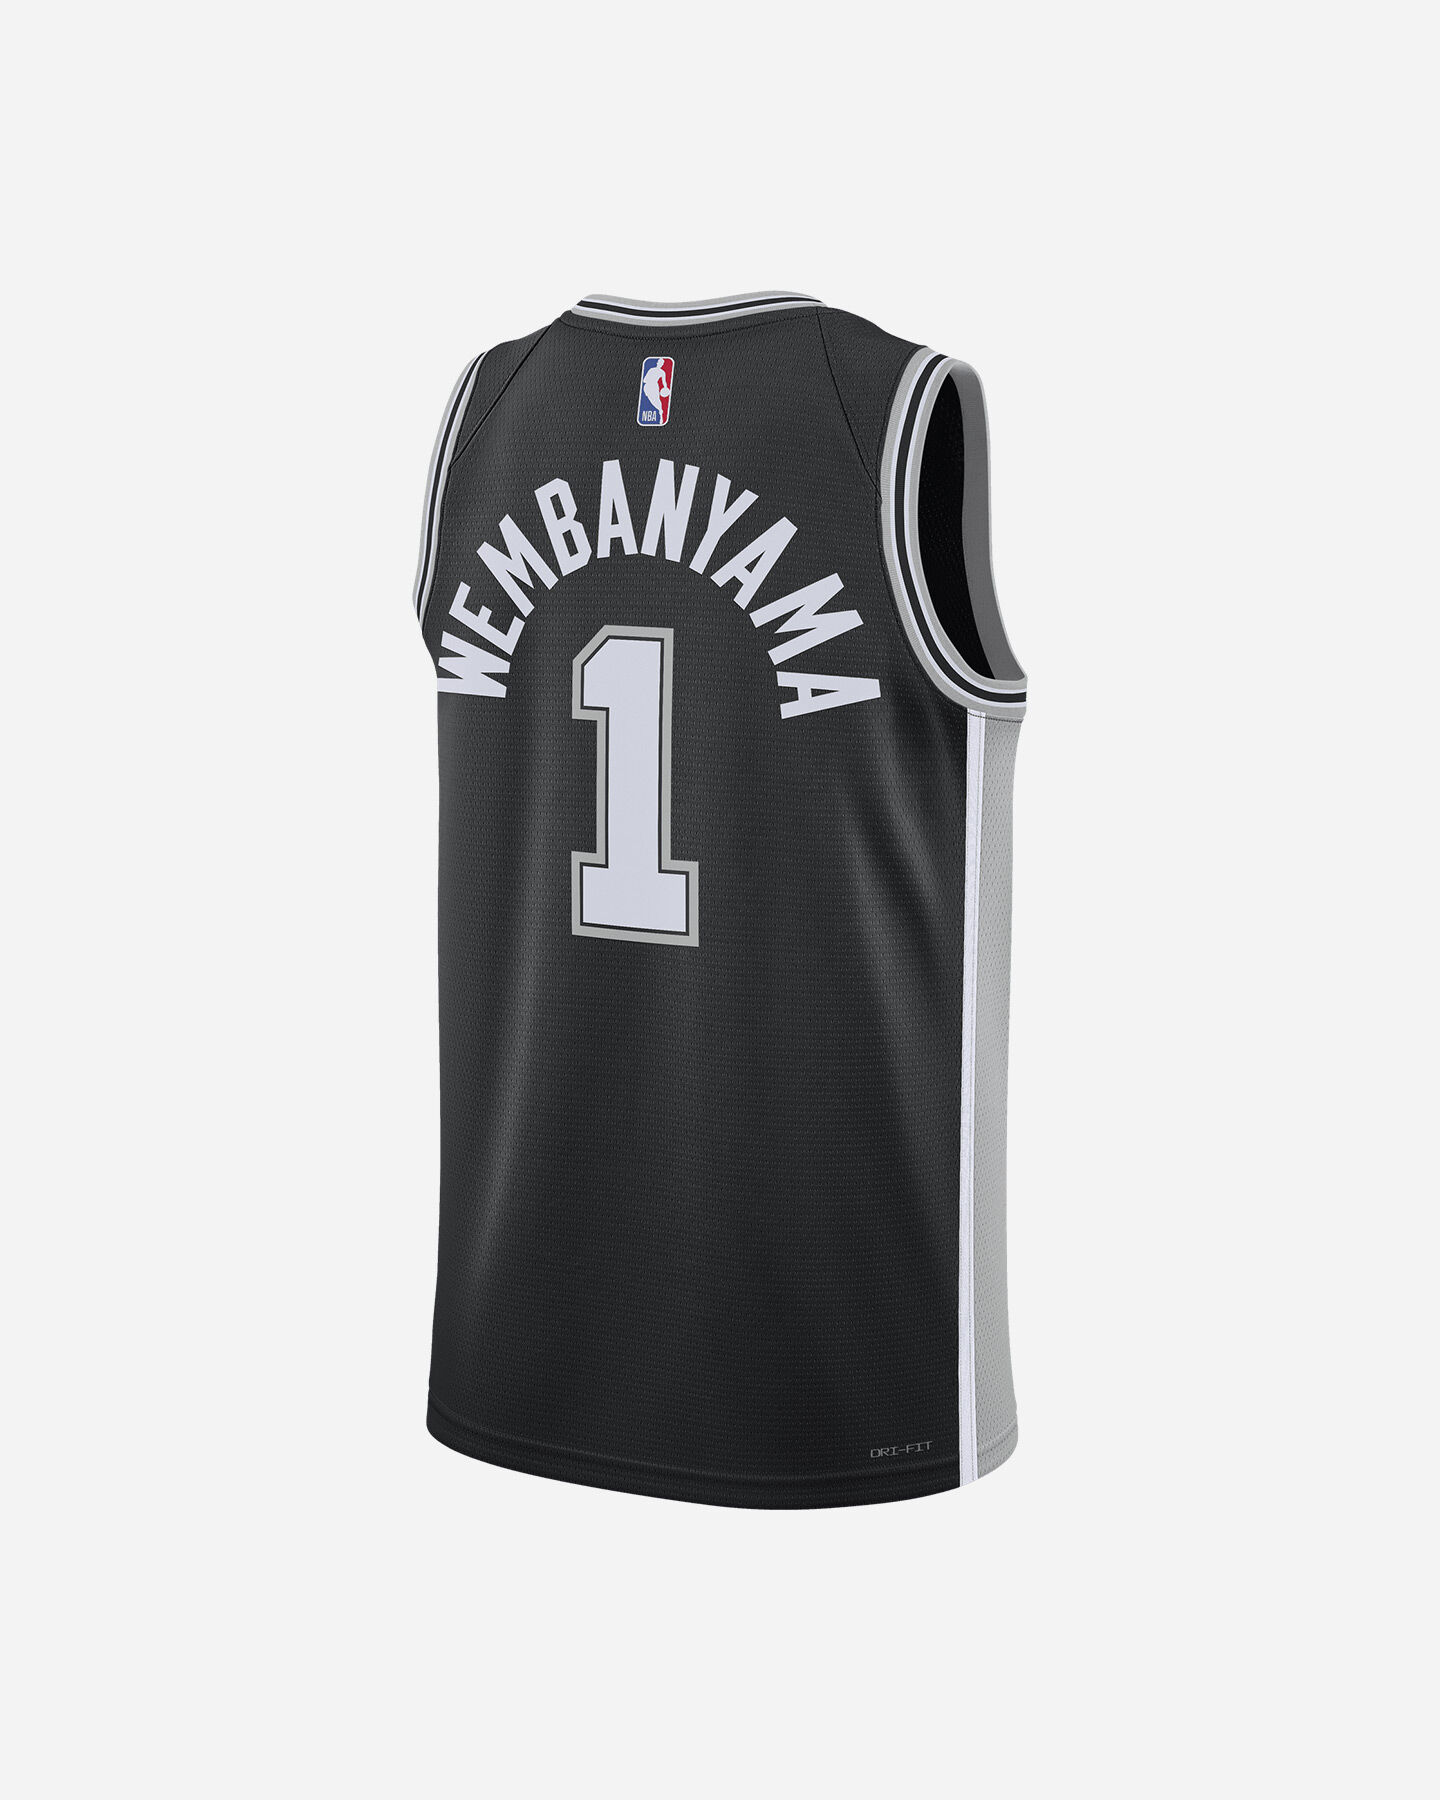  Canotta basket NIKE ICON SPURS WEMBAYANA SWING 22 M S5689416|015|S scatto 1